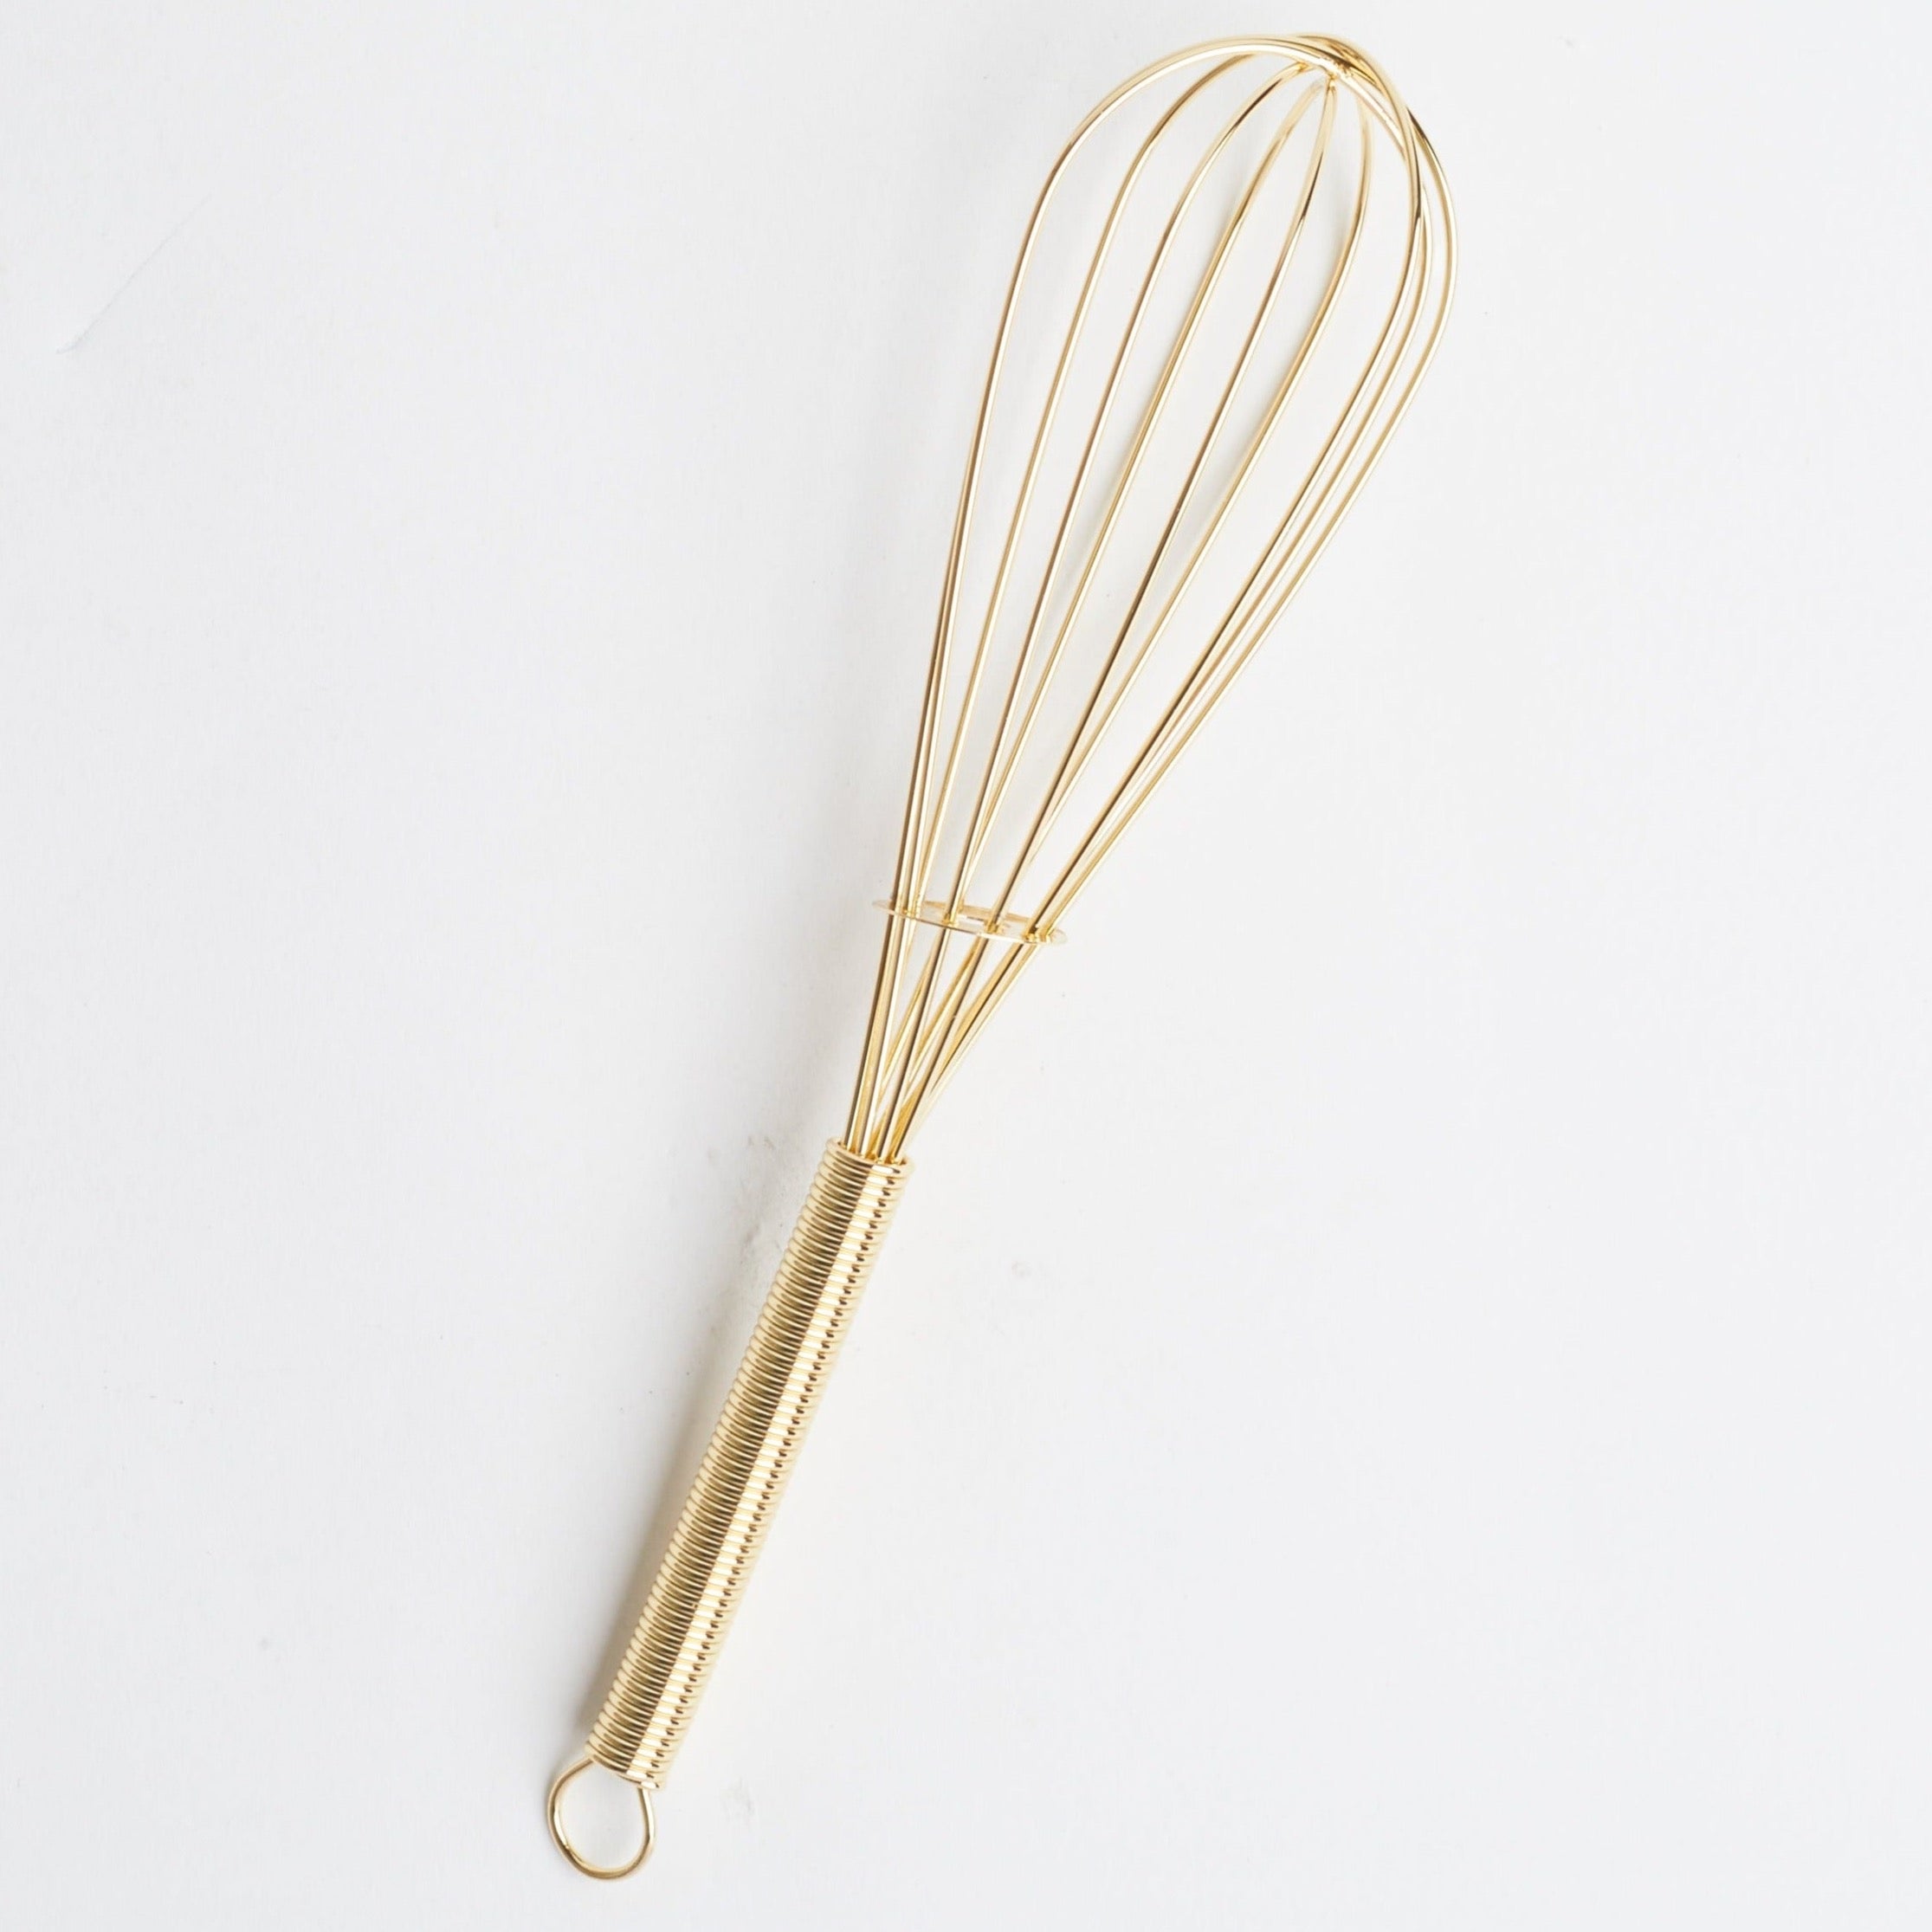 An 8" gold metal whisk against a white background